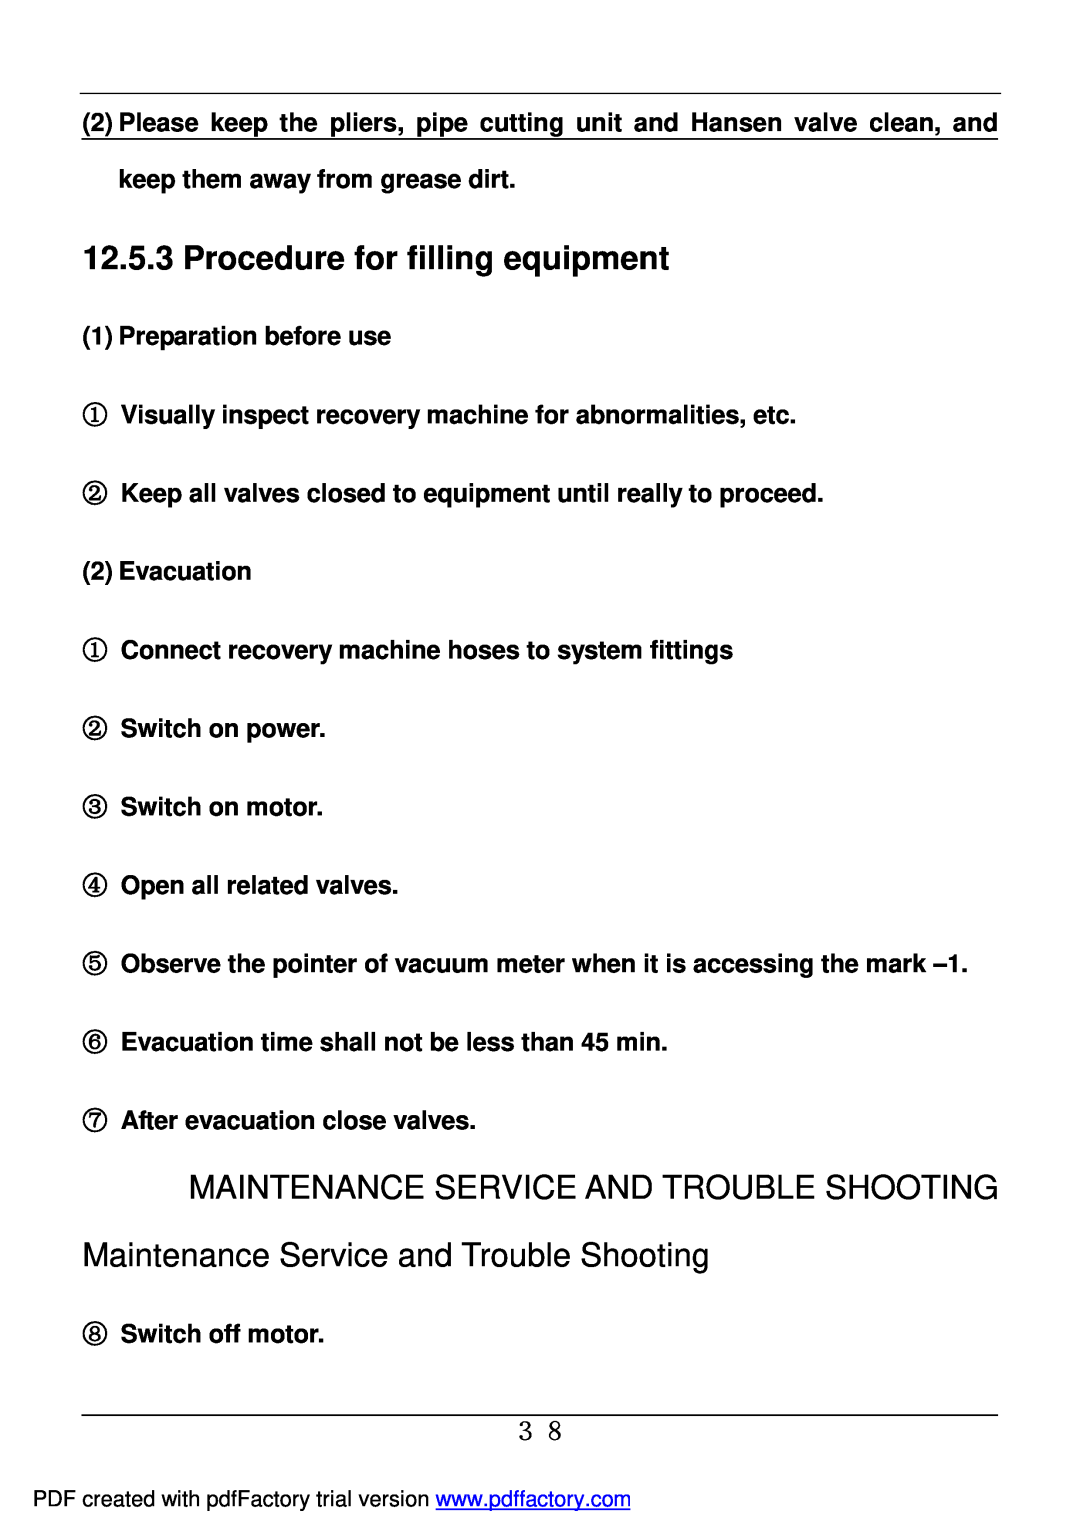 Haier BD-478A service manual Procedure for filling equipment, Maintenance Service And Trouble Shooting 